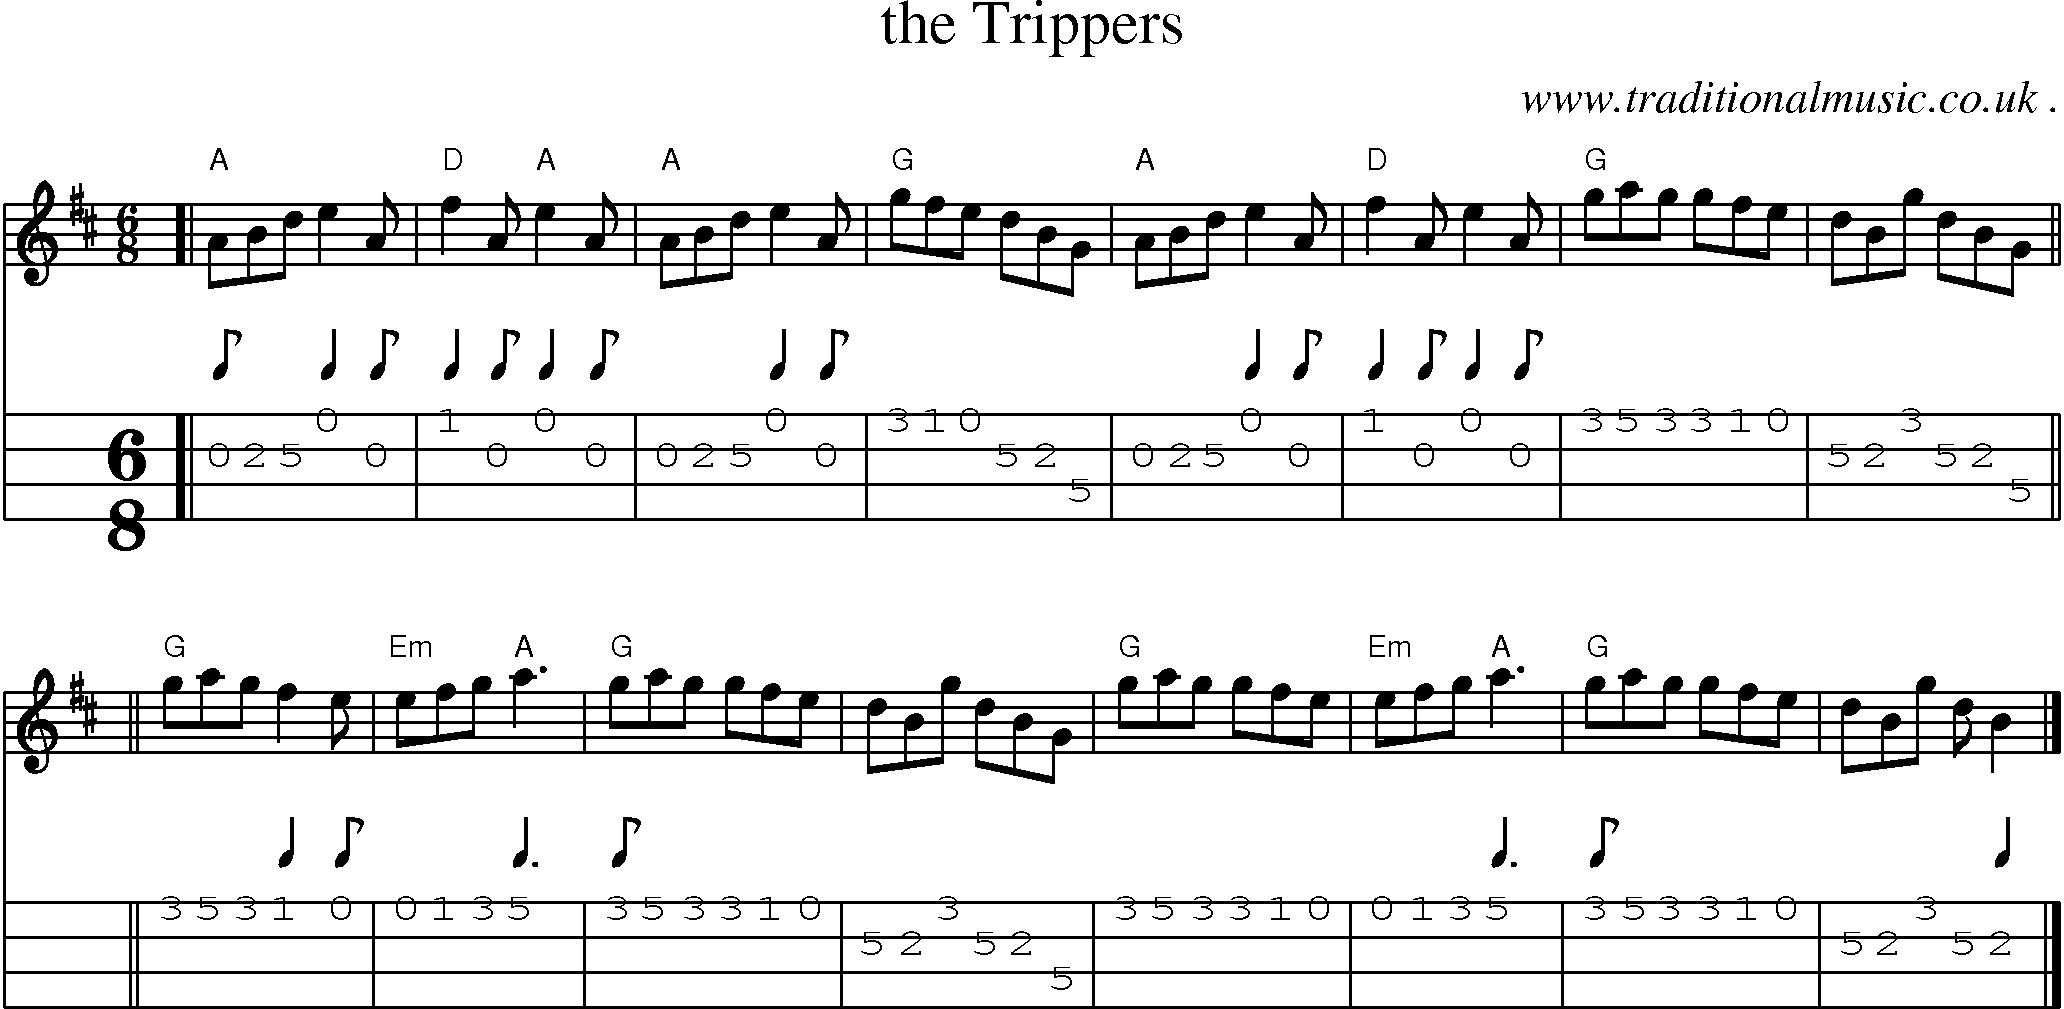 Sheet-music  score, Chords and Mandolin Tabs for The Trippers